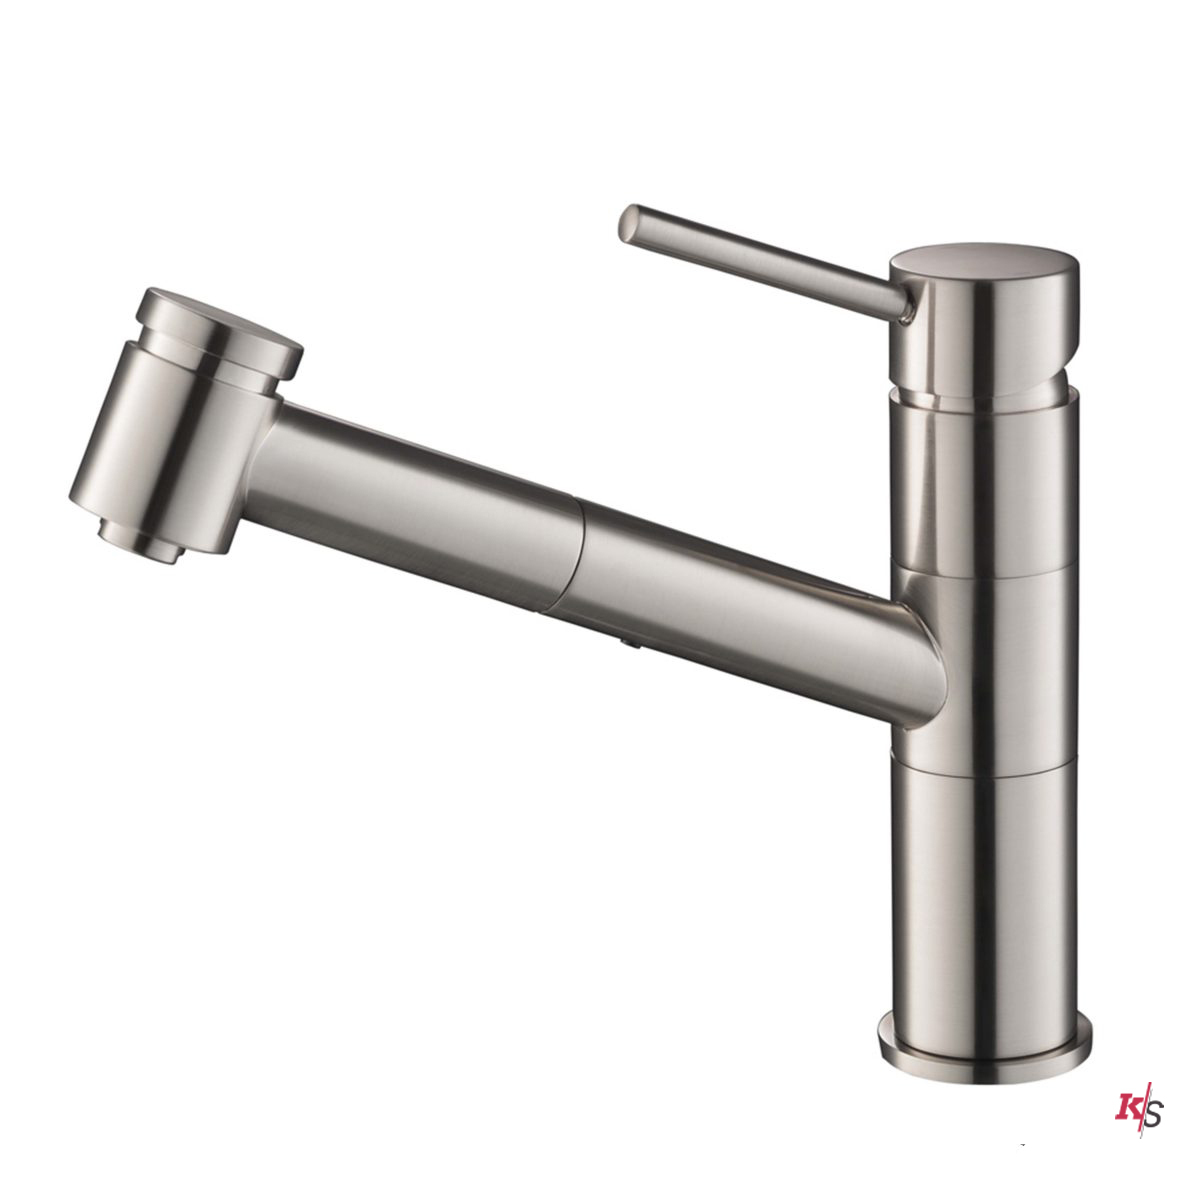 Single Handle Pull Out Kitchen Faucet - Chrome KS-F01-207-01